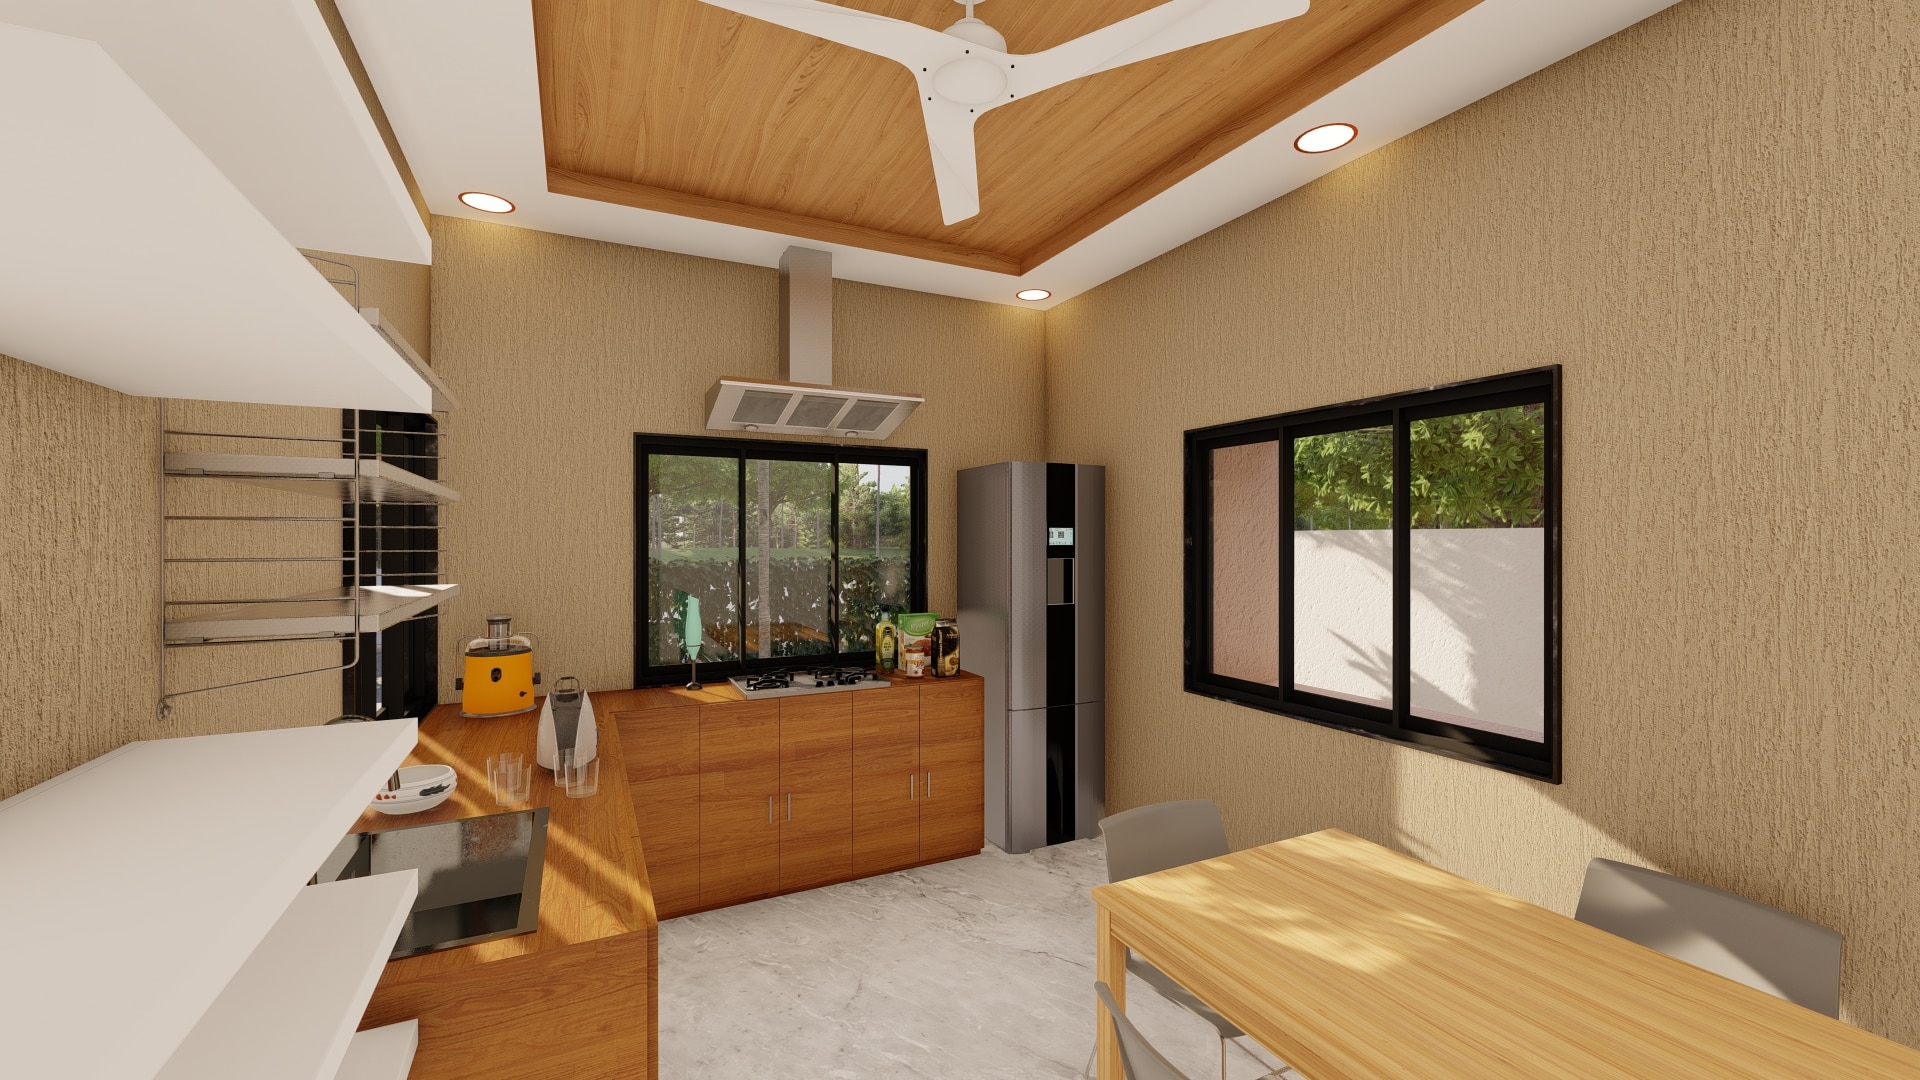 with dining area large kitchen best villa home layout design by urban terrace east facing 30x60 sq ft